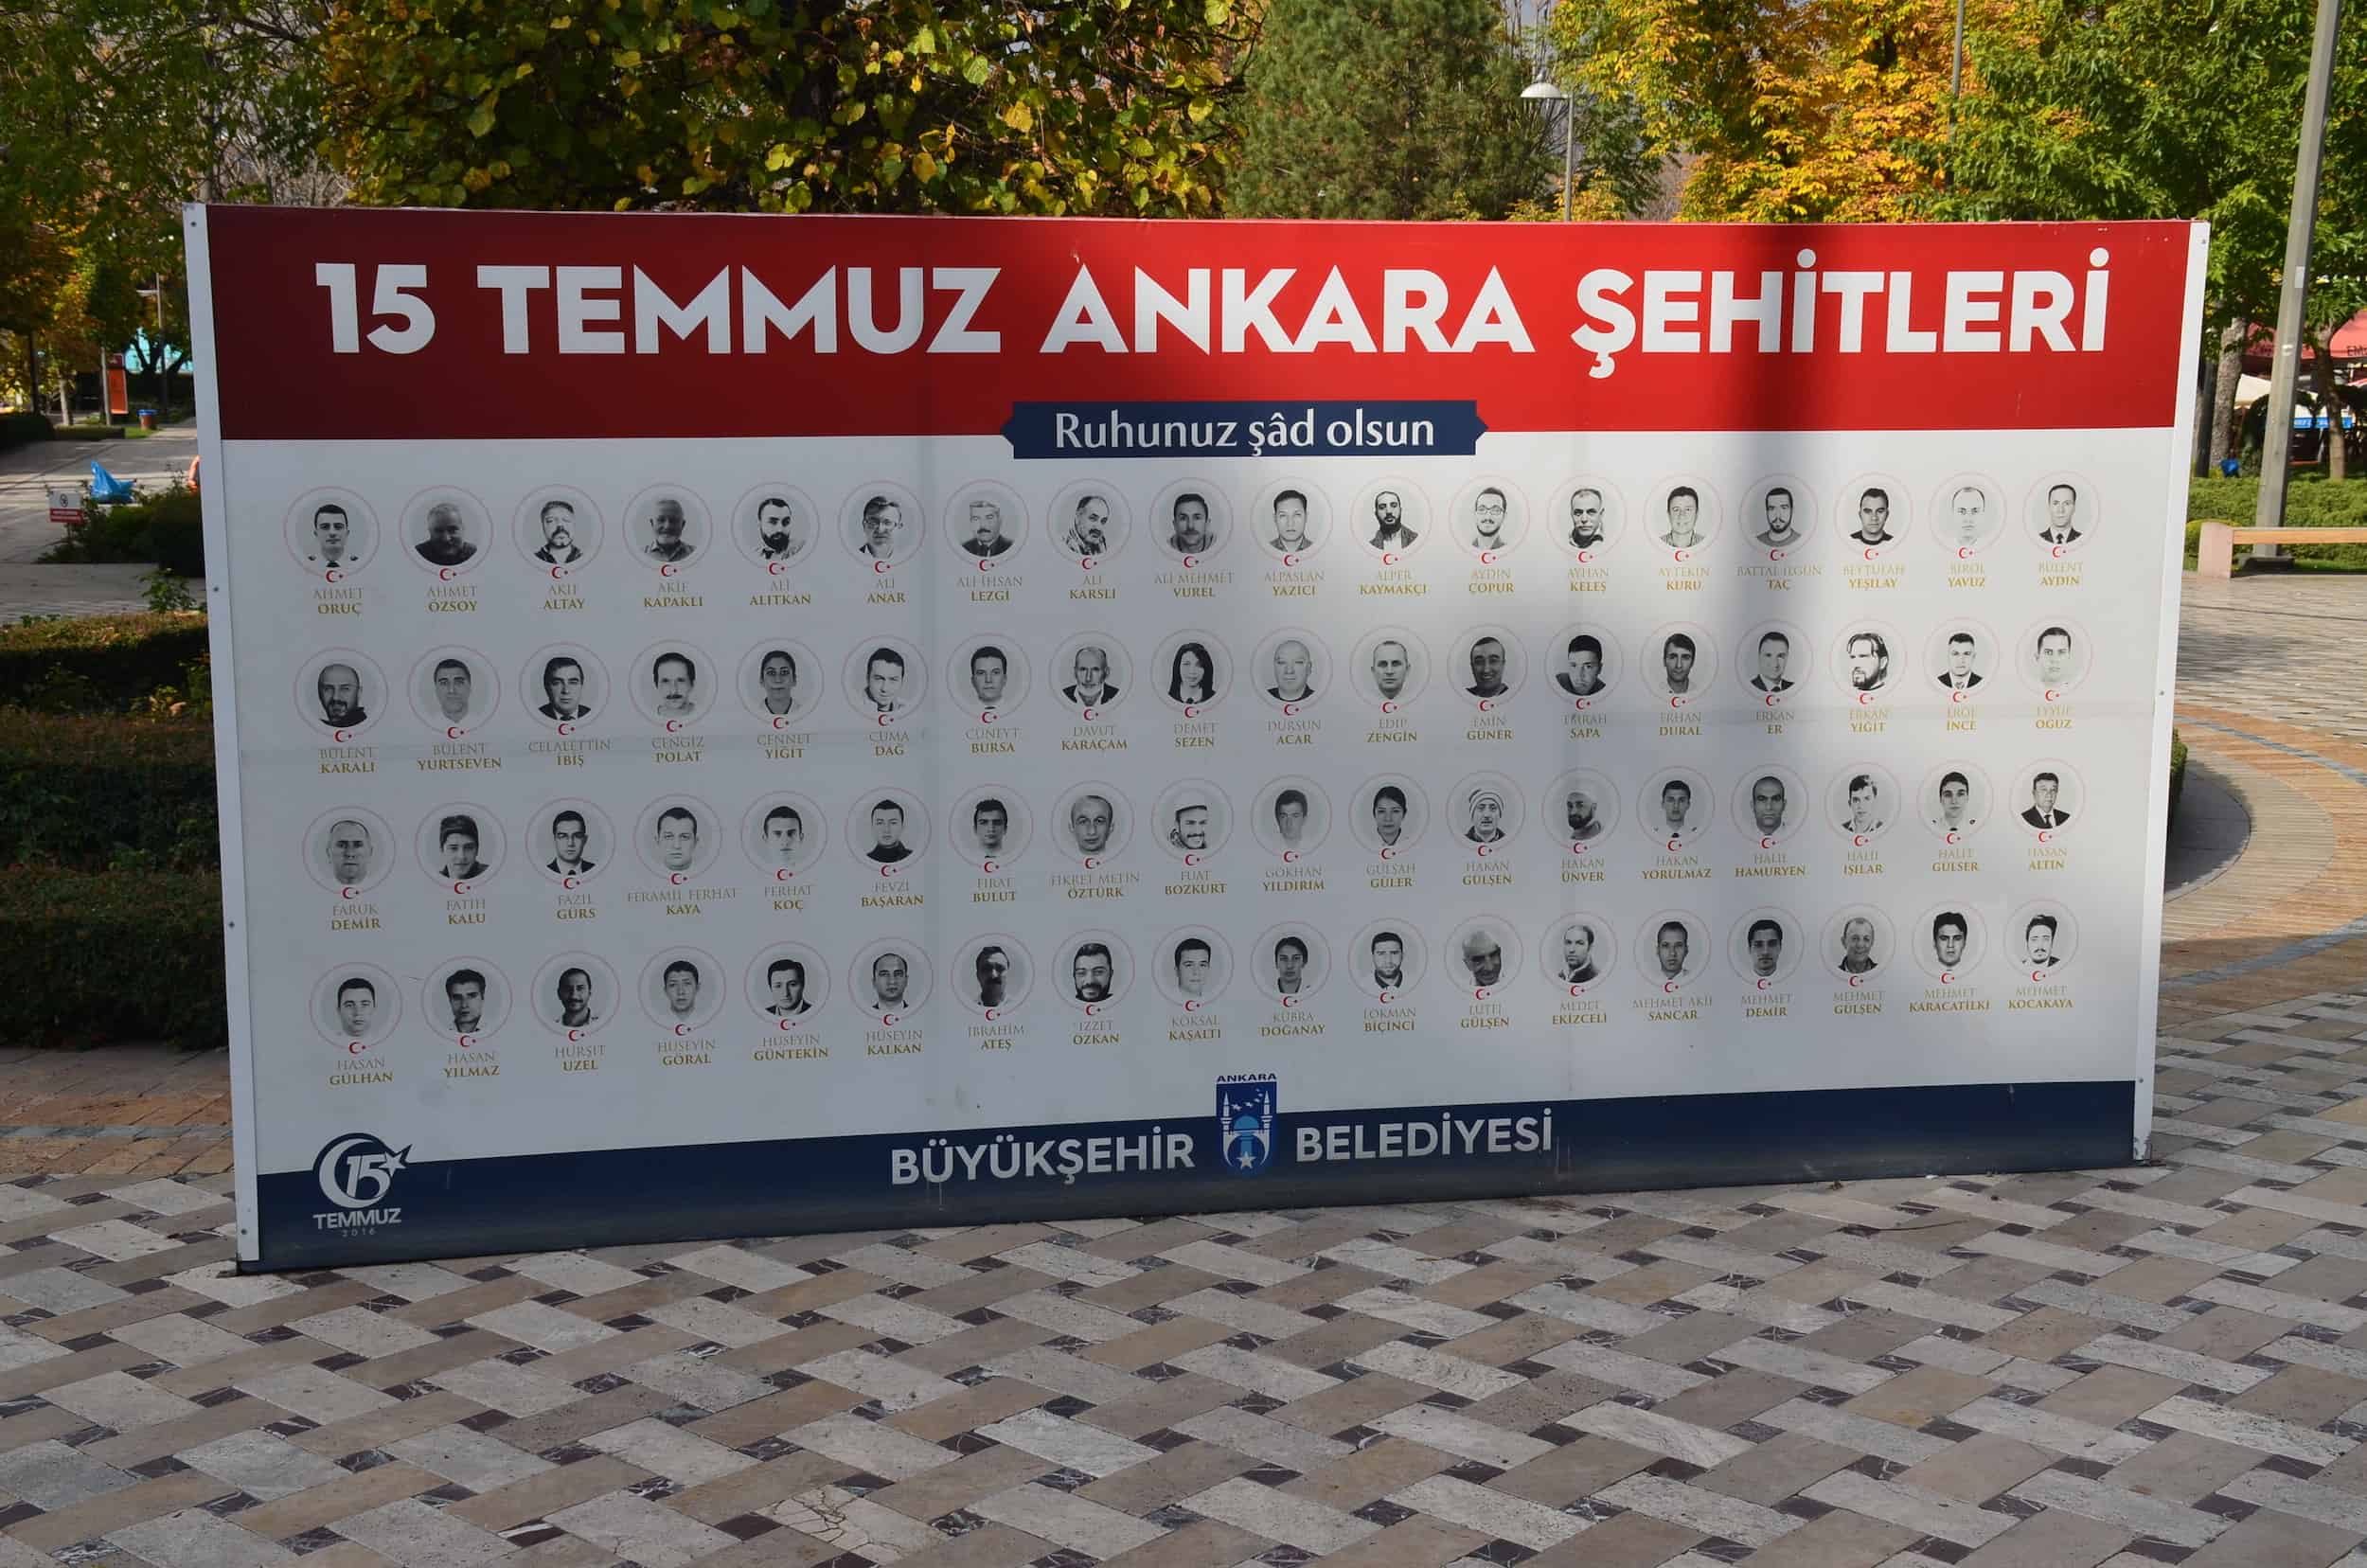 Memorial to locals killed during the 2016 coup attempt